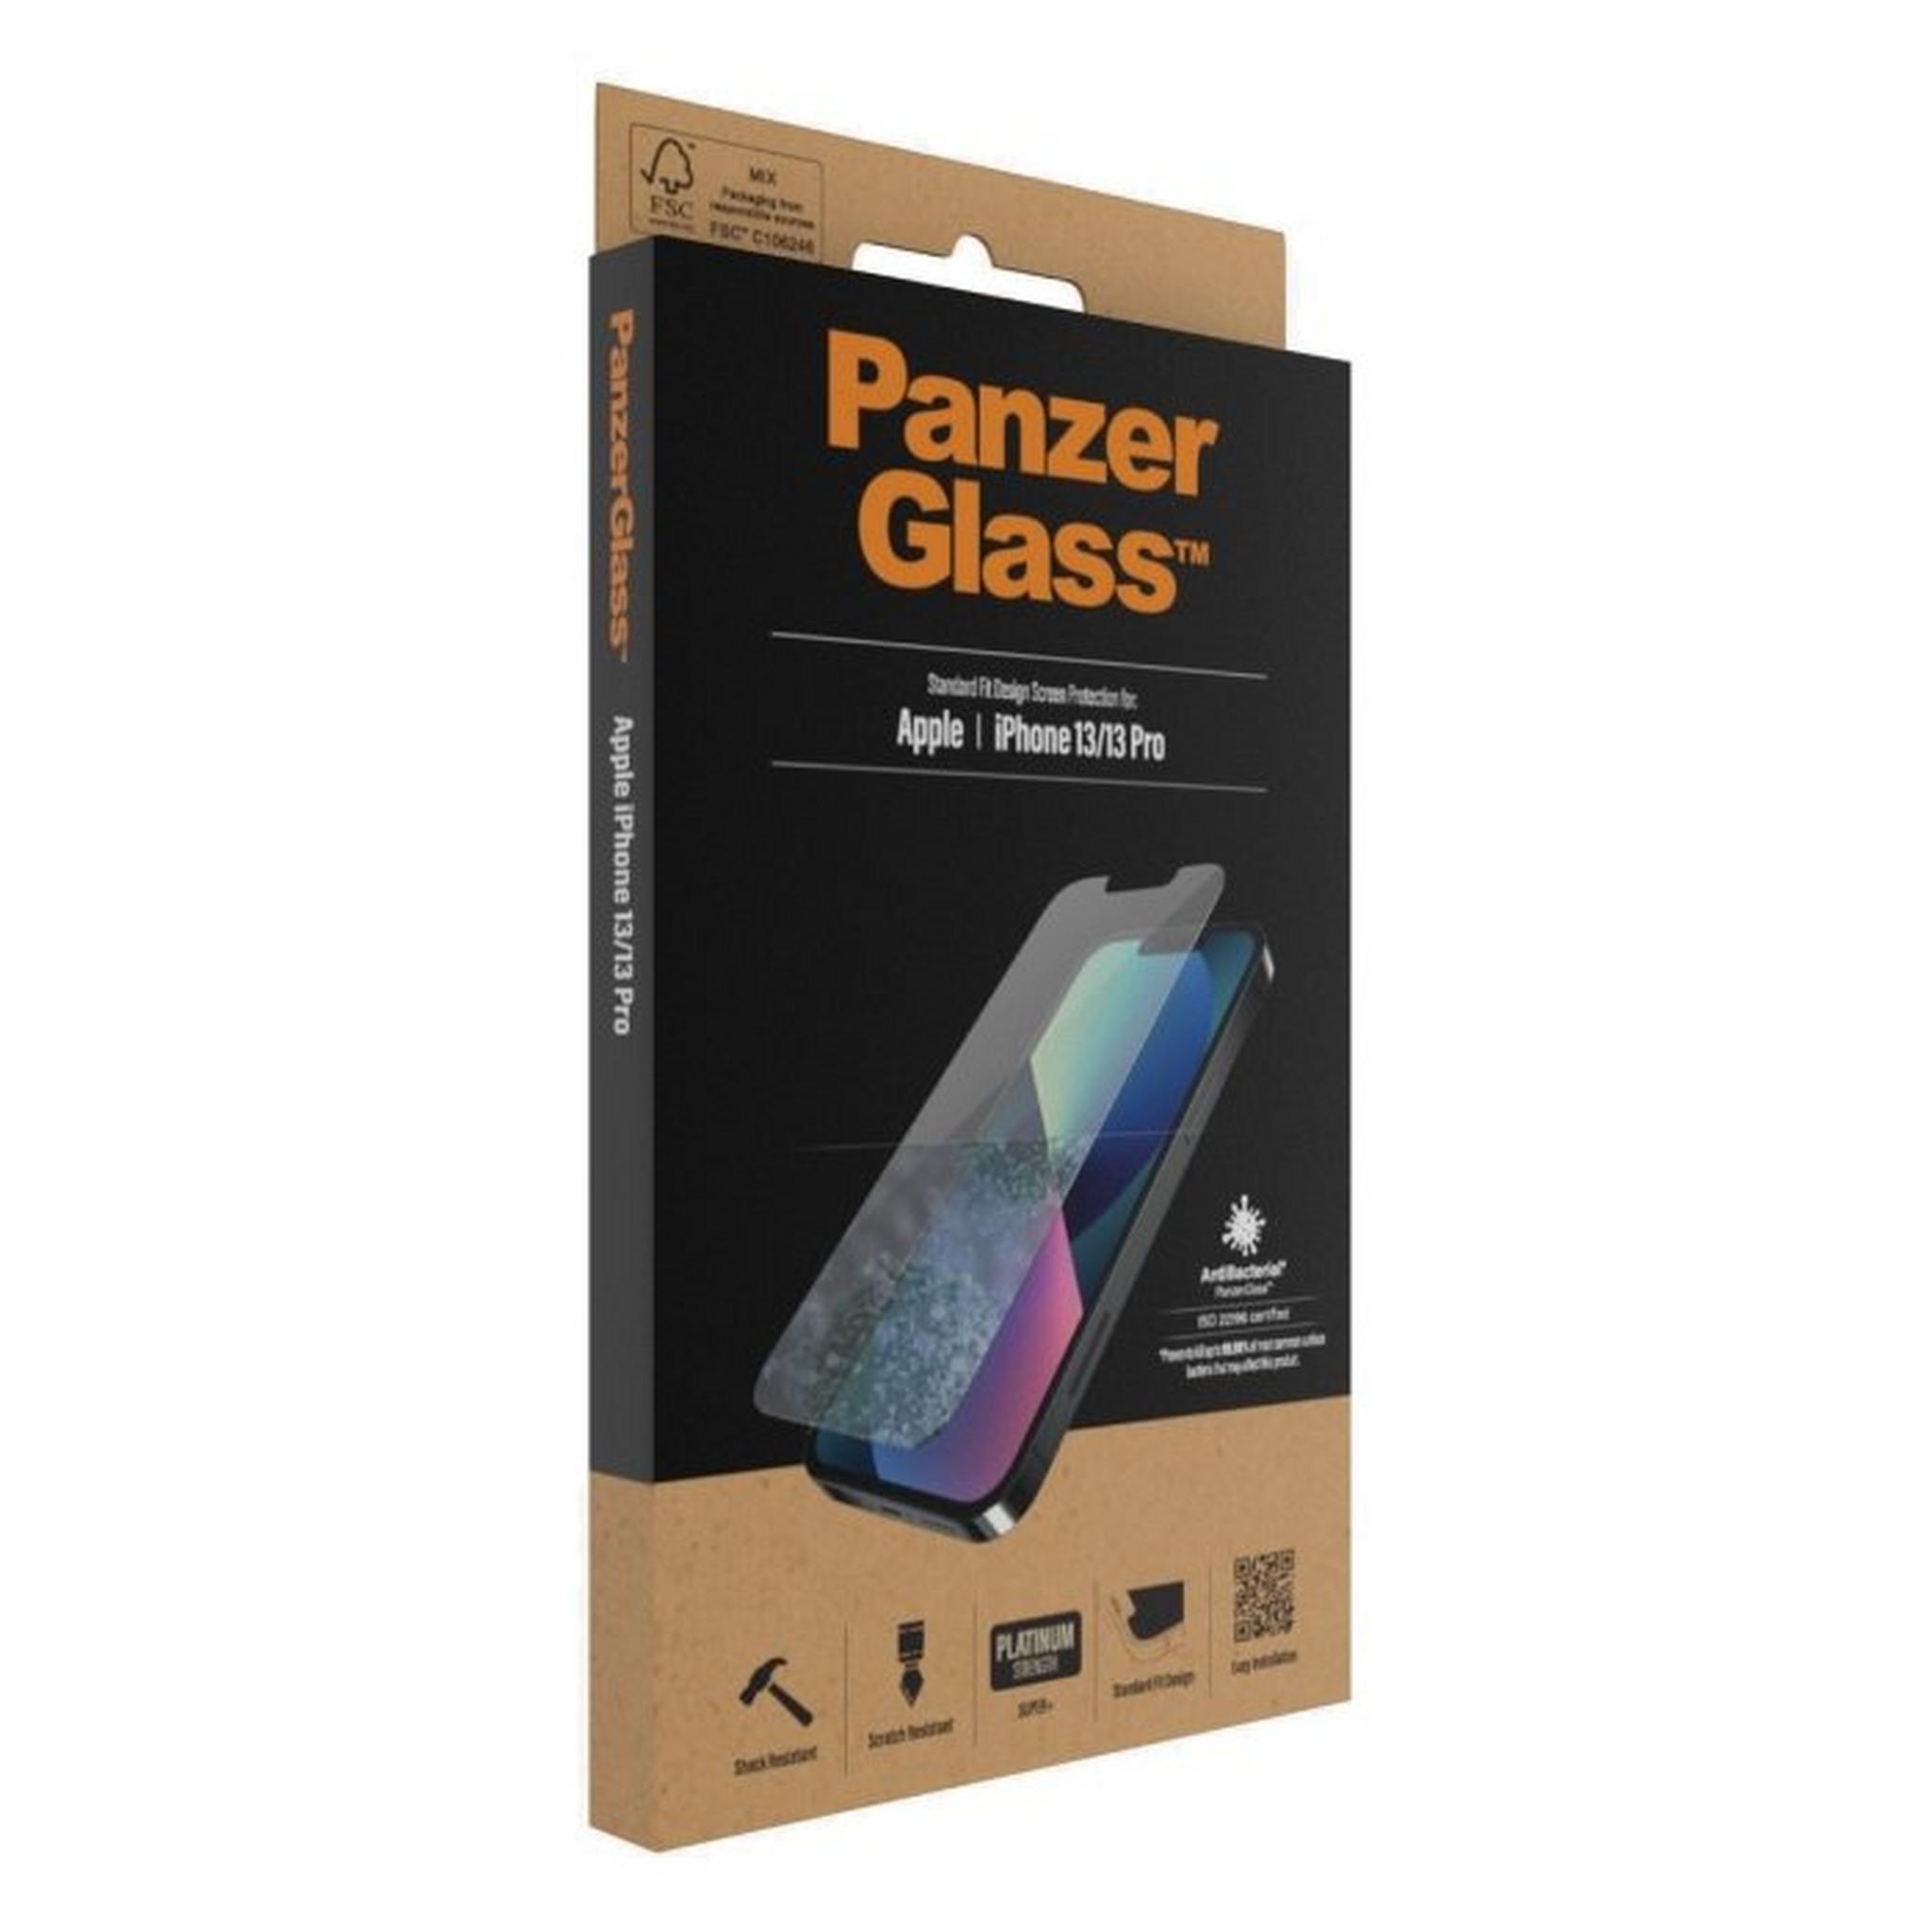 Panzer iPhone 13 Pro Standard Glass Screen Protector - Clear